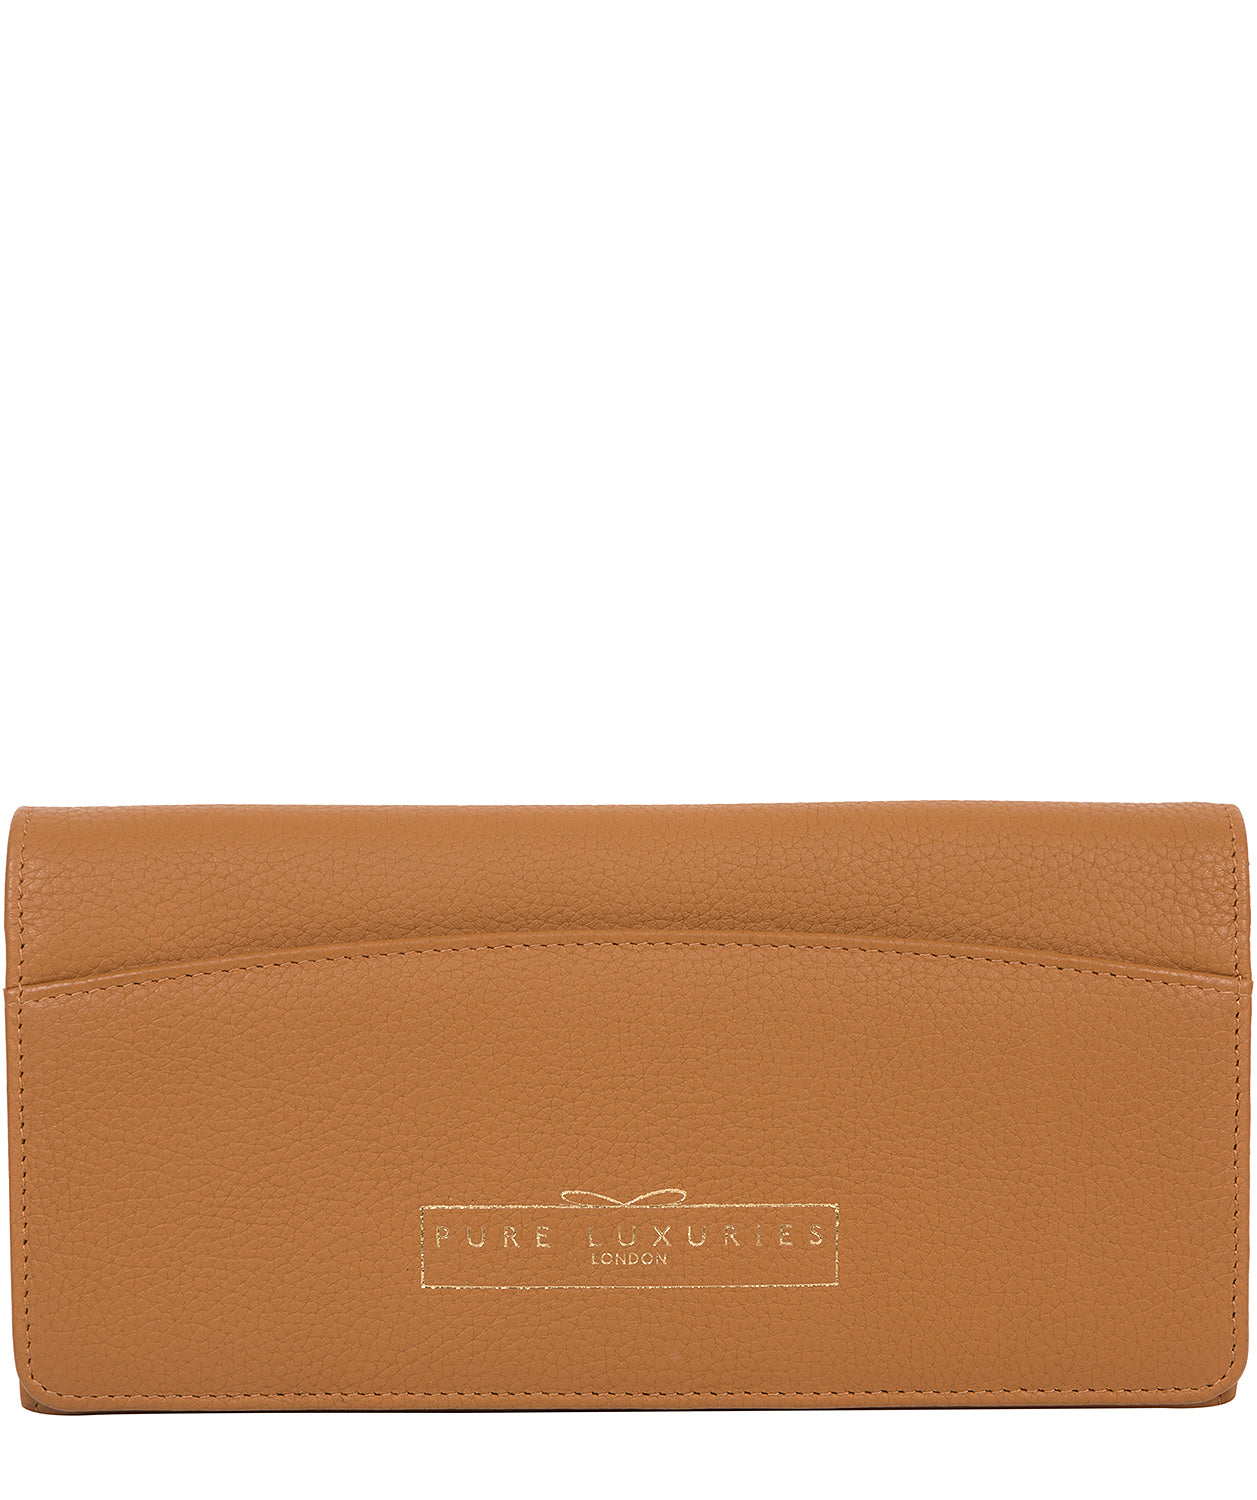 Tan Leather Purse 'Izabel' by Pure Luxuries – Pure Luxuries London